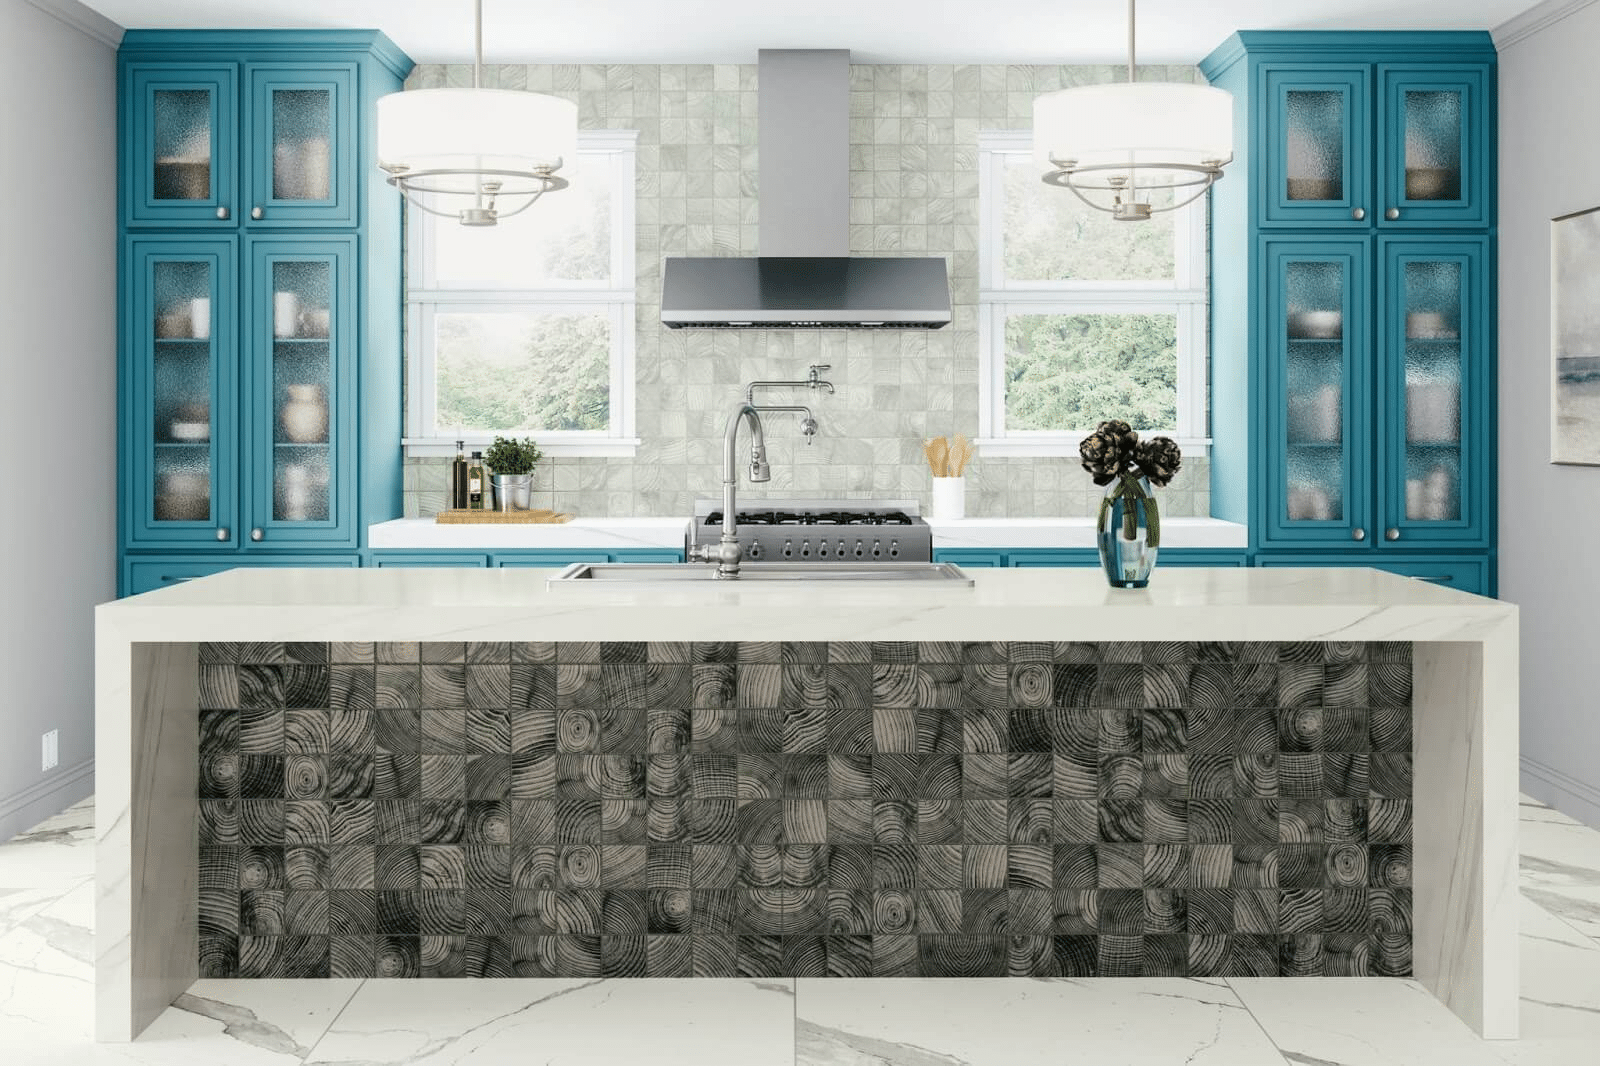 1646048416 497 A Tiled Kitchen Island Might Just Be Your Next Kitchen 